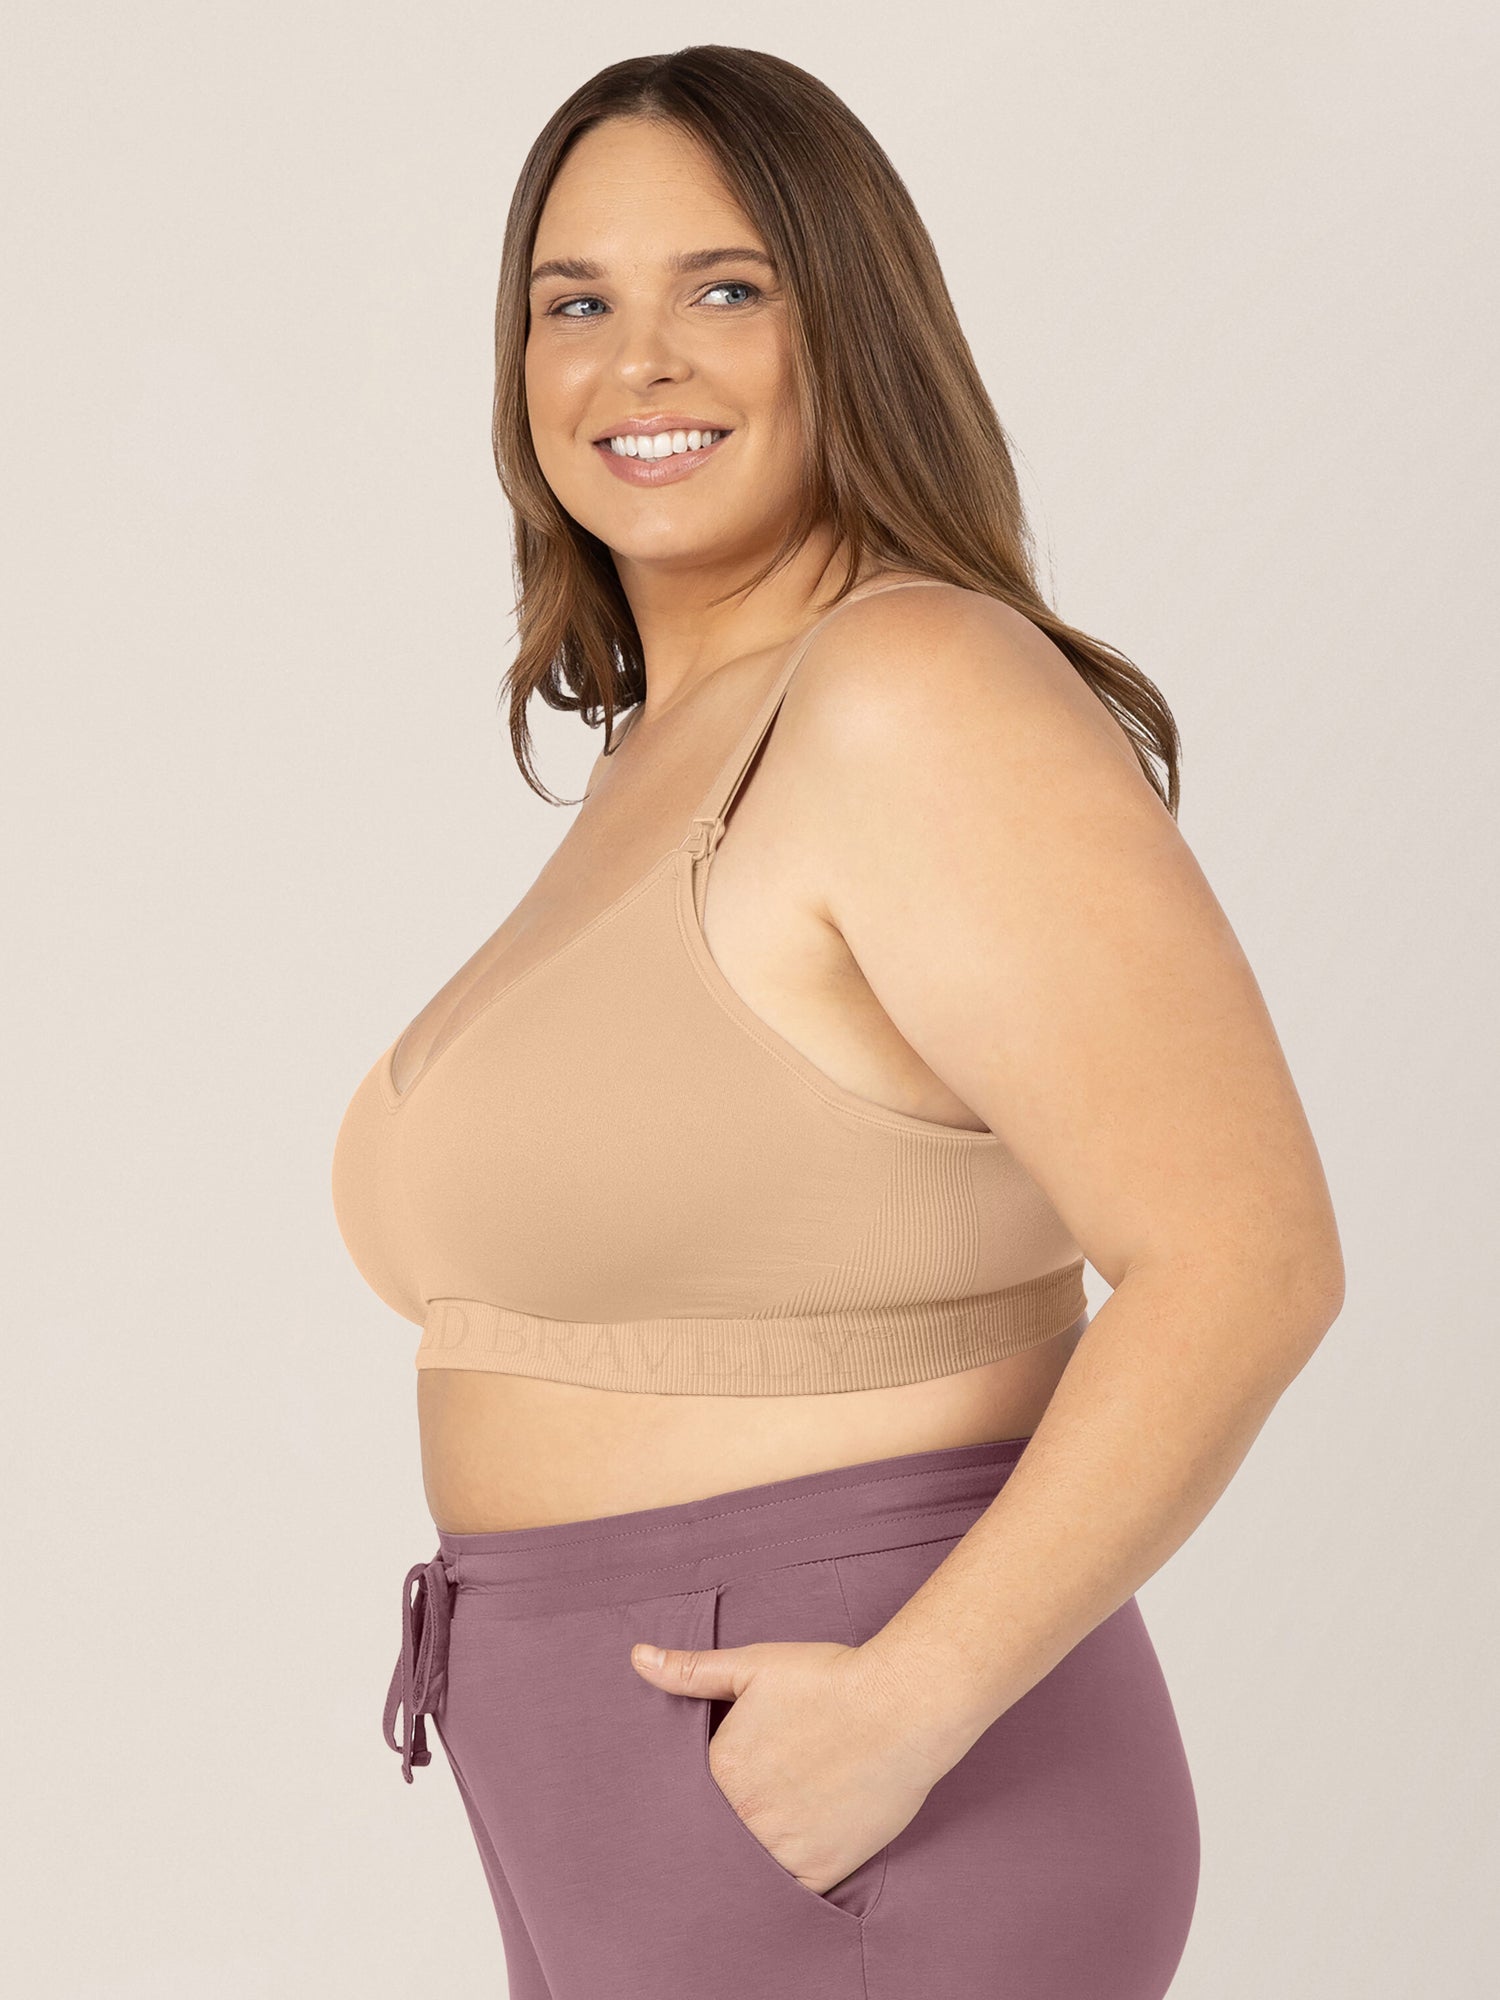 Model wearing the Signature Sublime® Contour Maternity & Nursing Bra in Beige with her hands in her pockets.